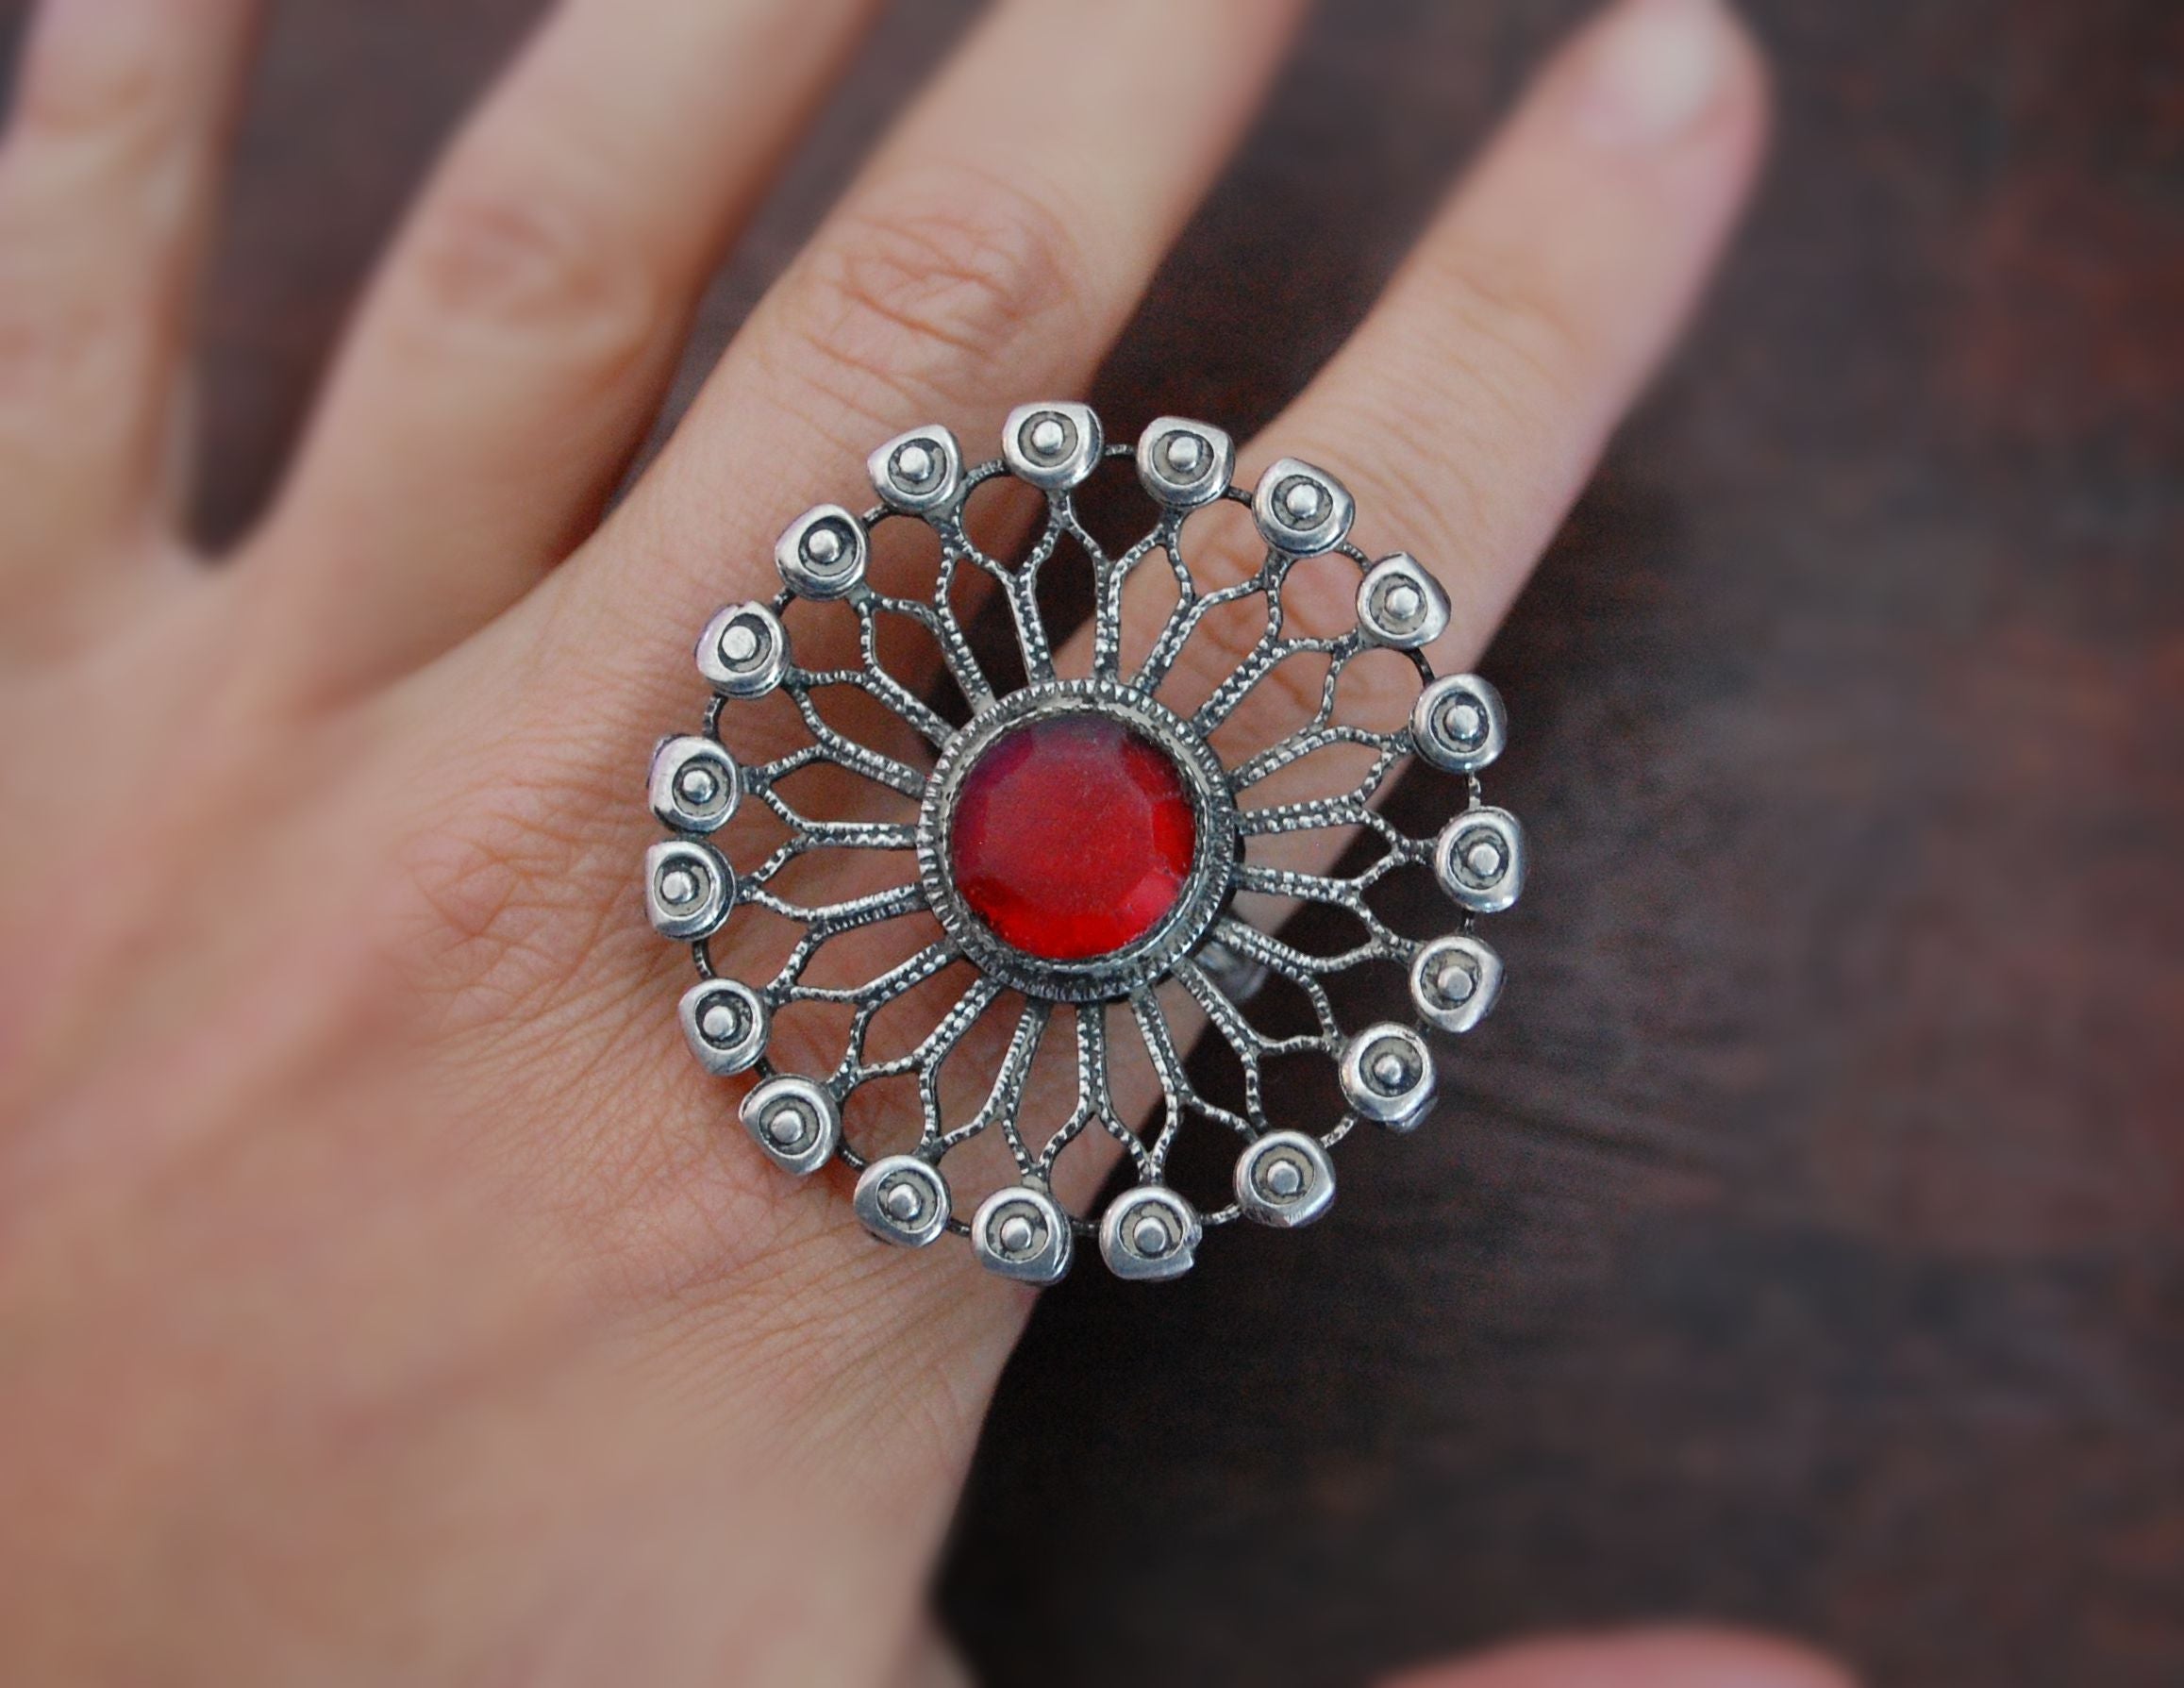 Huge Antique Afghani Silver Ring with Red Glass - Size 7.25